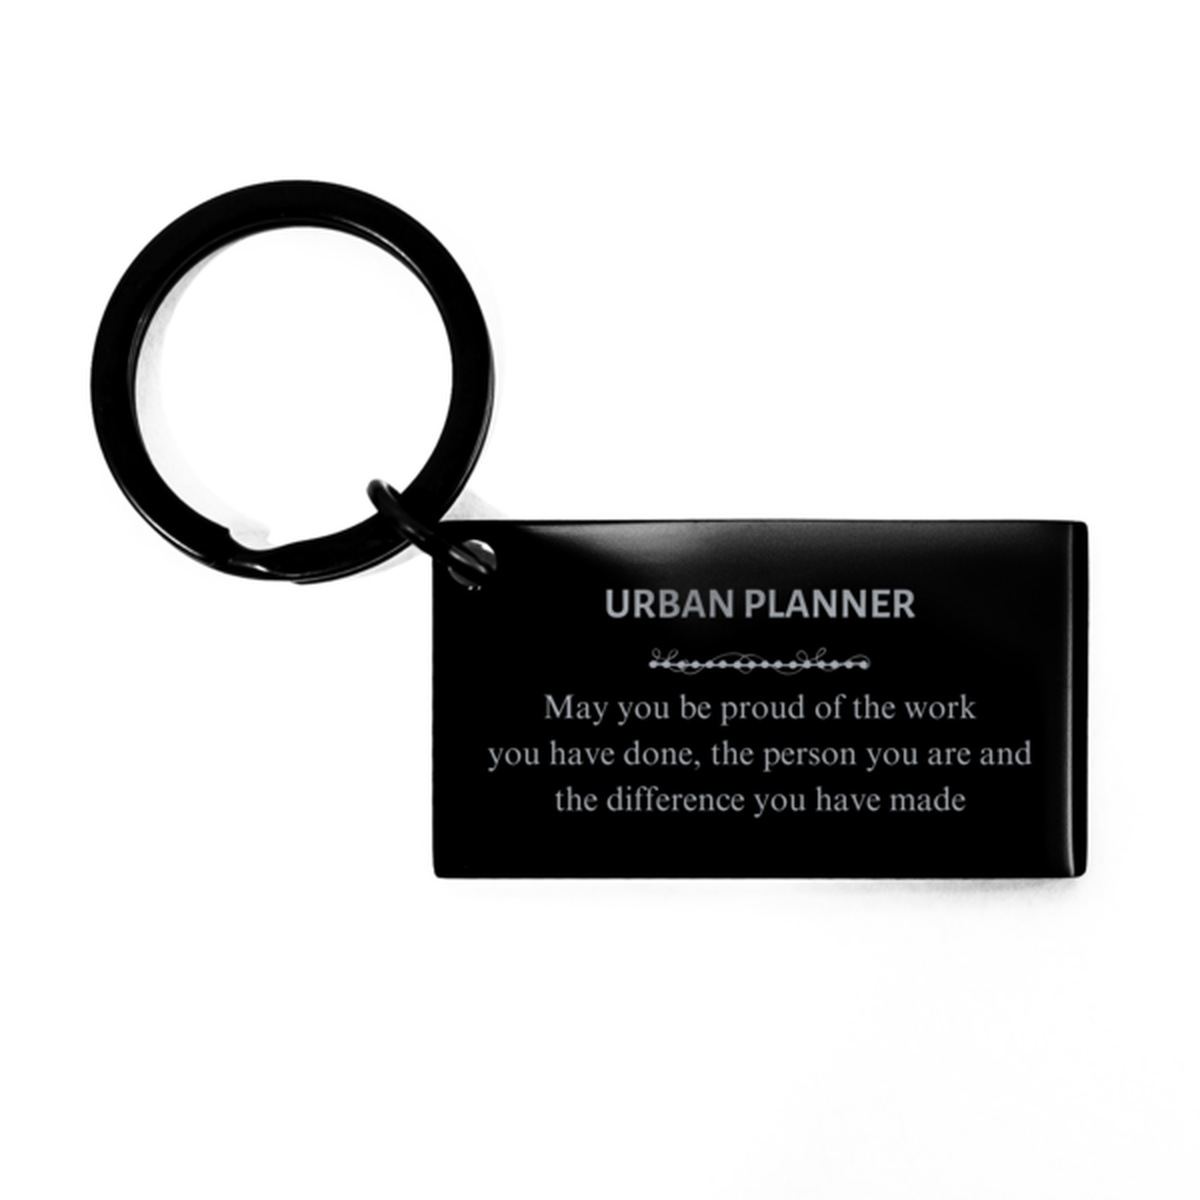 Aerospace Engineer May you be proud of the work you have done, Retirement Urban Planner Keychain for Colleague Appreciation Gifts Amazing for Urban Planner